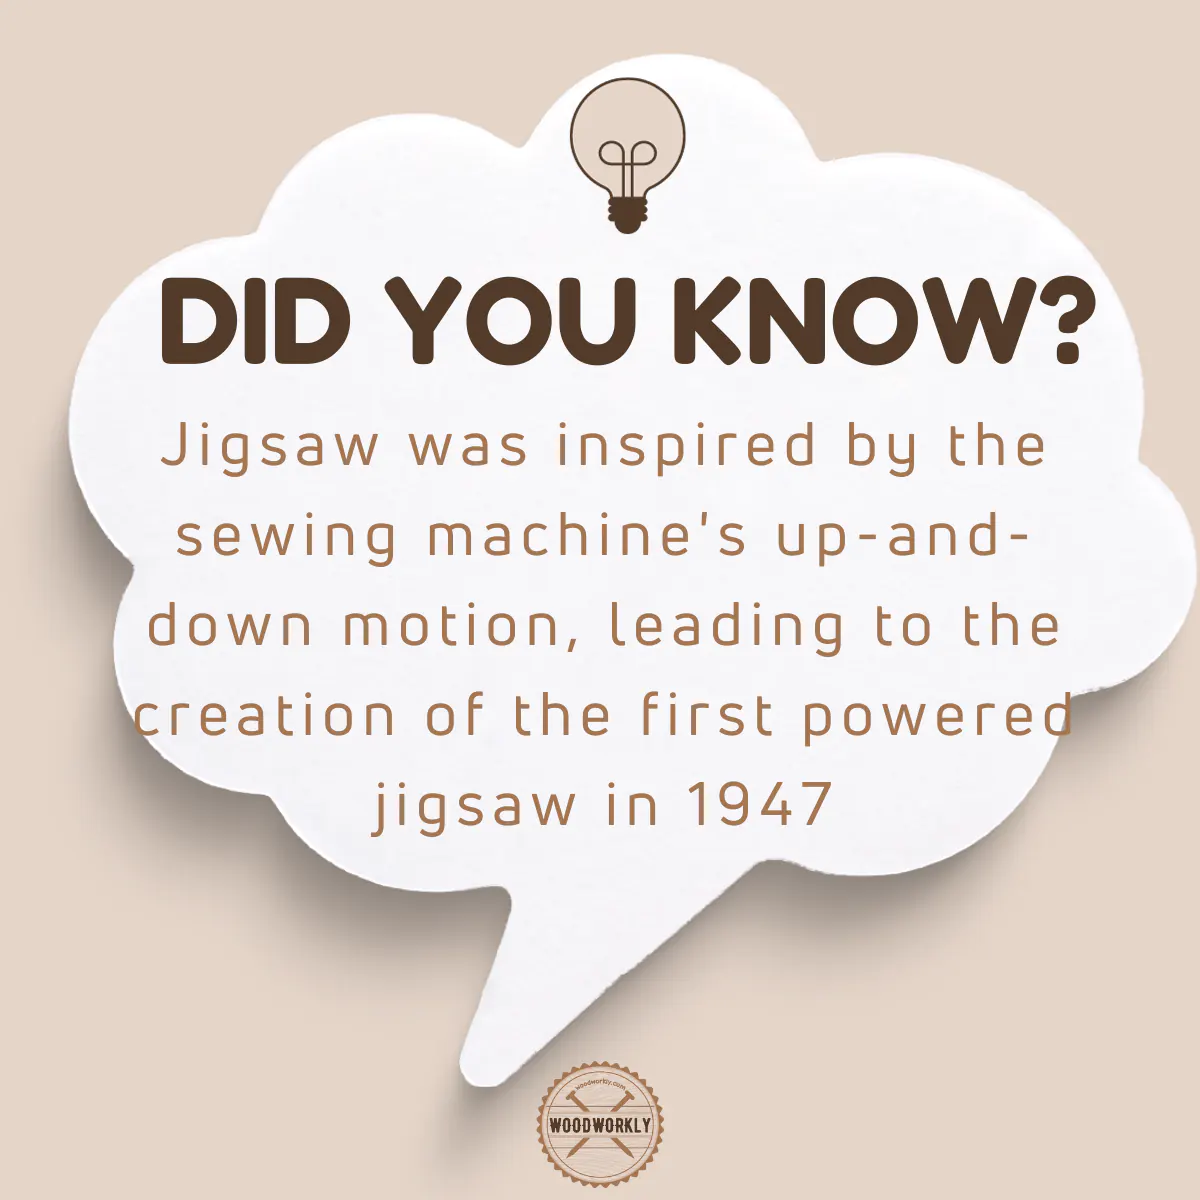 Did you know fact about Jigsaw